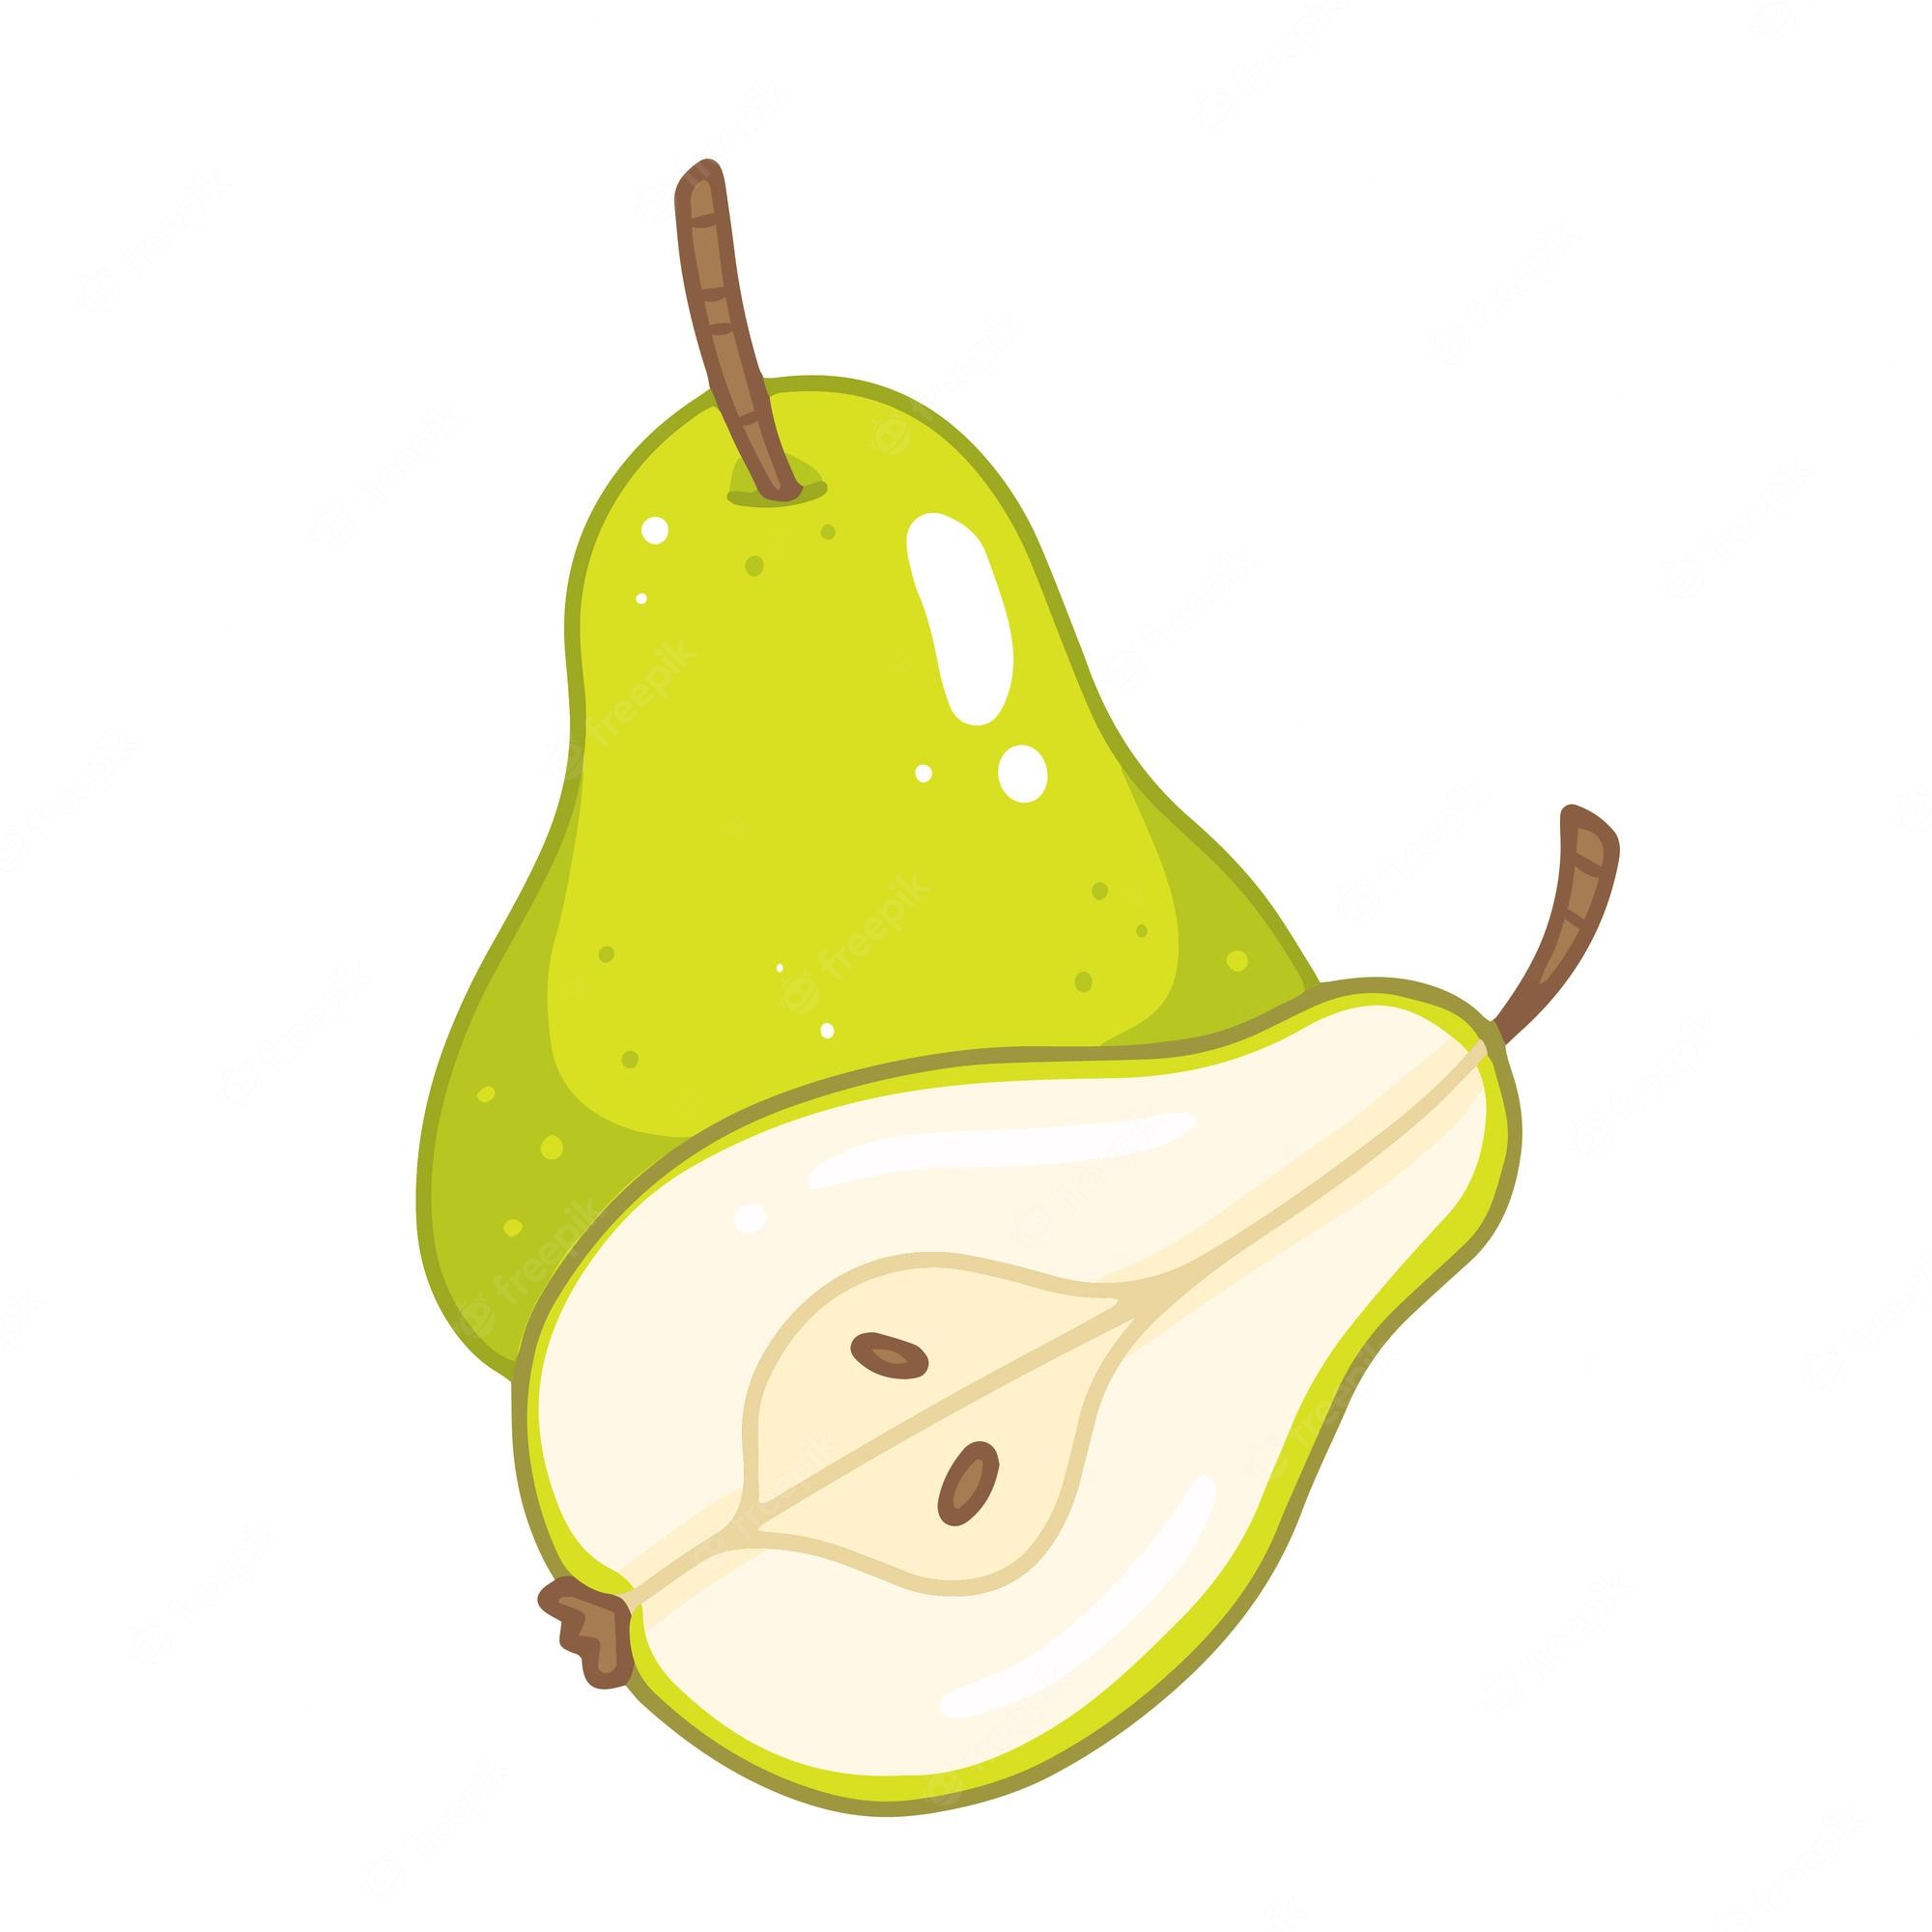 Green Pear Cartoon Character With Happy Face Expression On White Clip